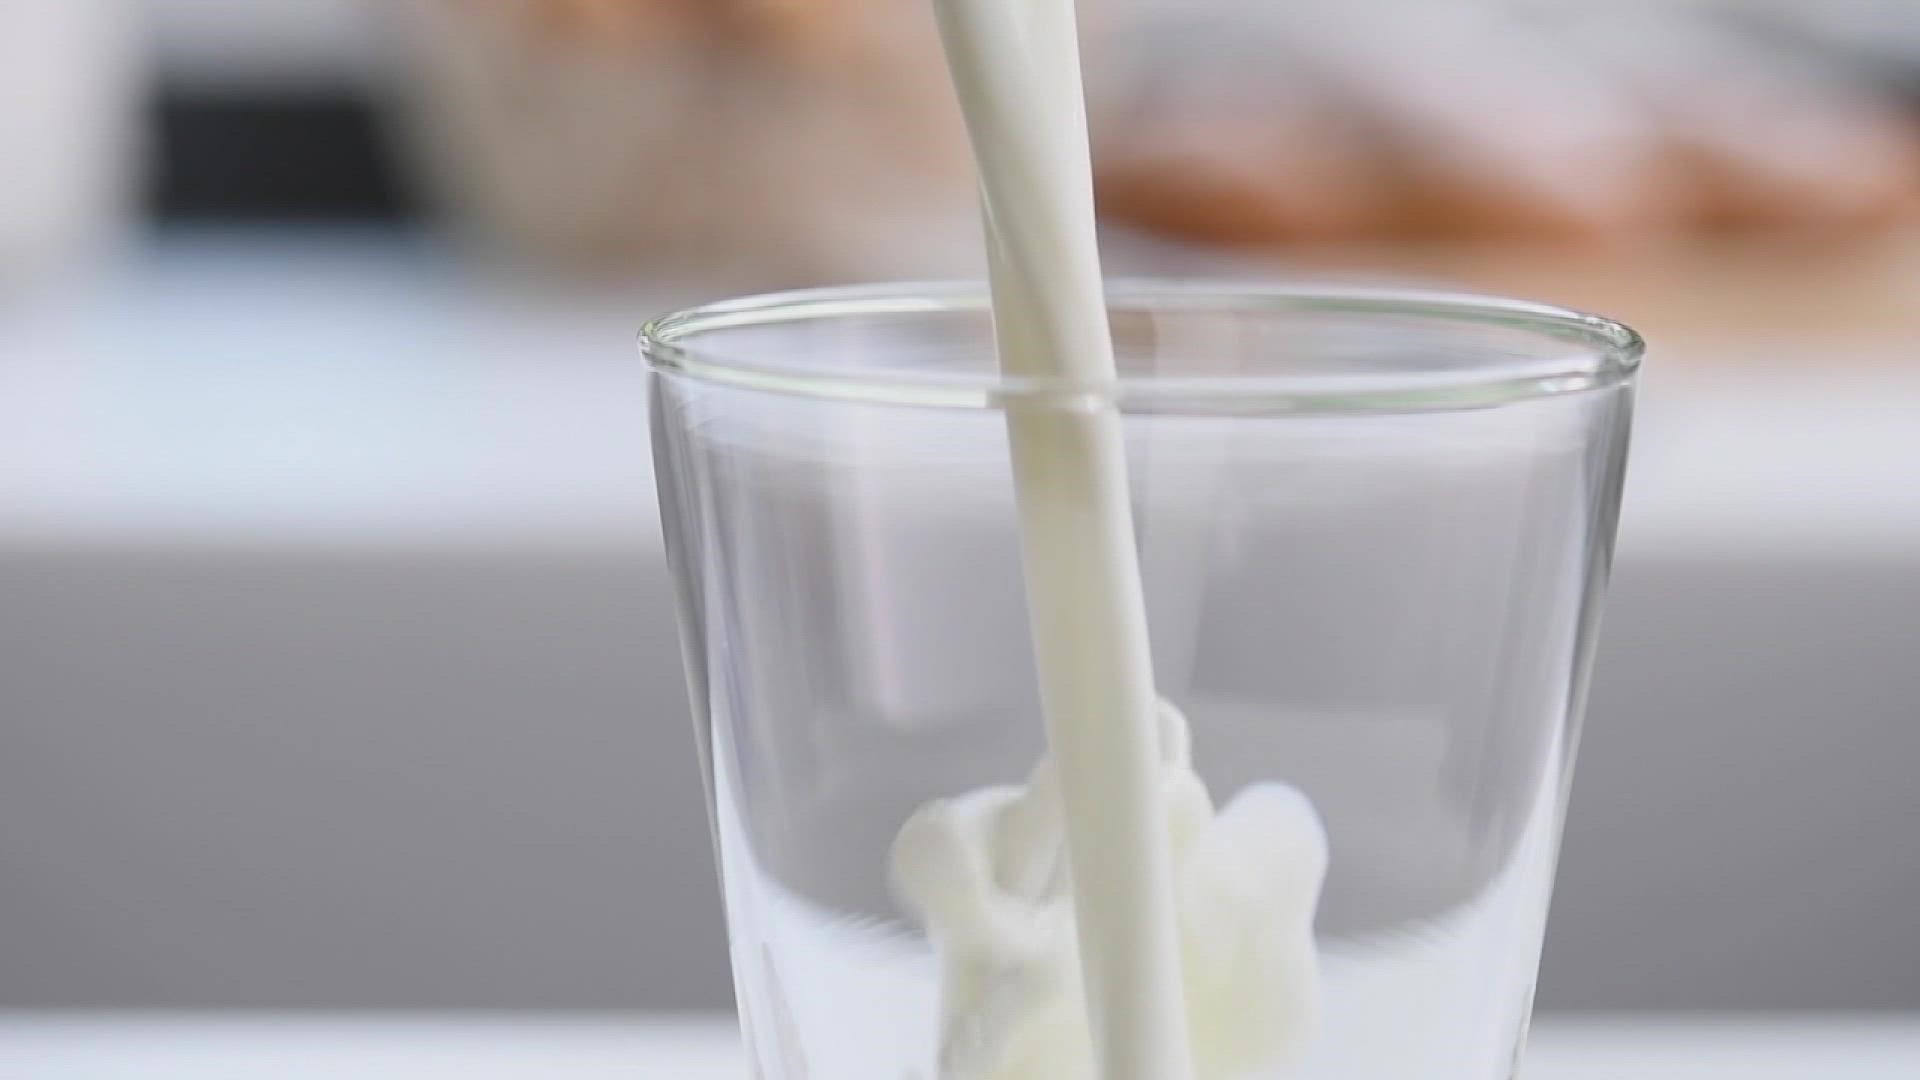 Drinking milk is linked to improved bone health, and it can reduce the risk of cardiovascular disease and Type 2 diabetes.